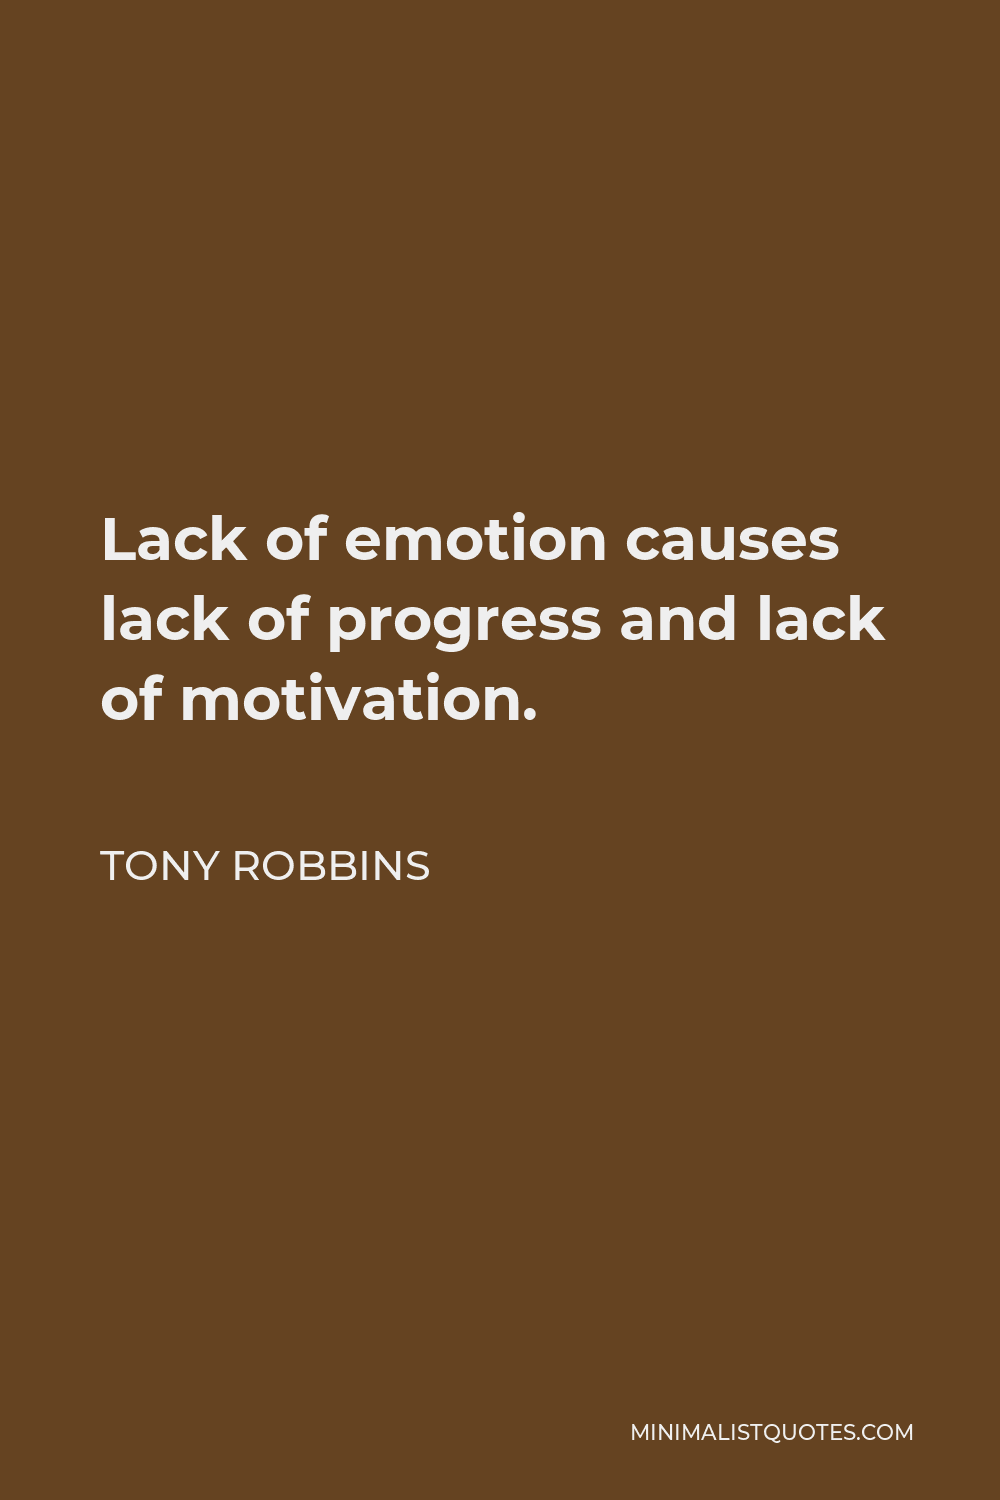 Tony Robbins Quote - Lack of emotion causes lack of progress and lack of motivation.